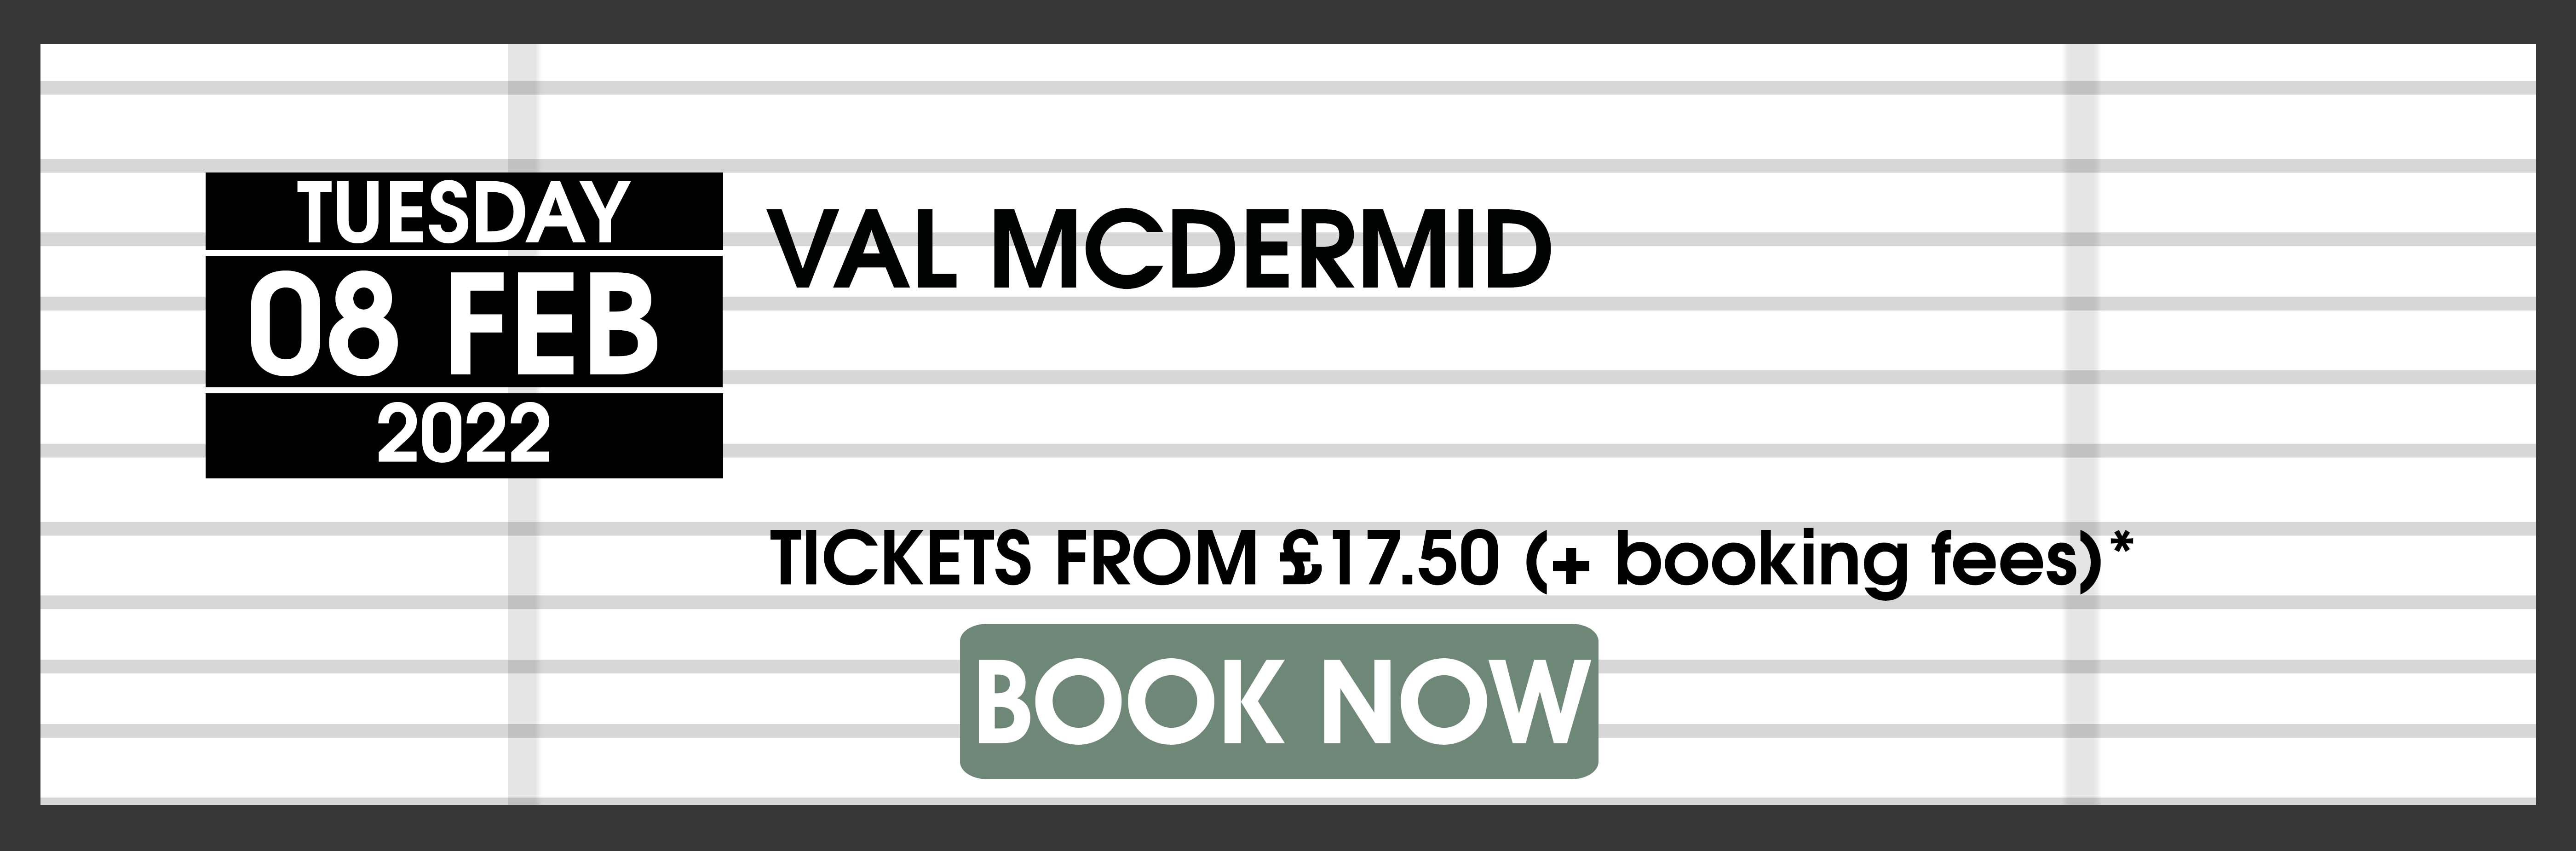 08.02.22 VAL MCD BOOK NOW